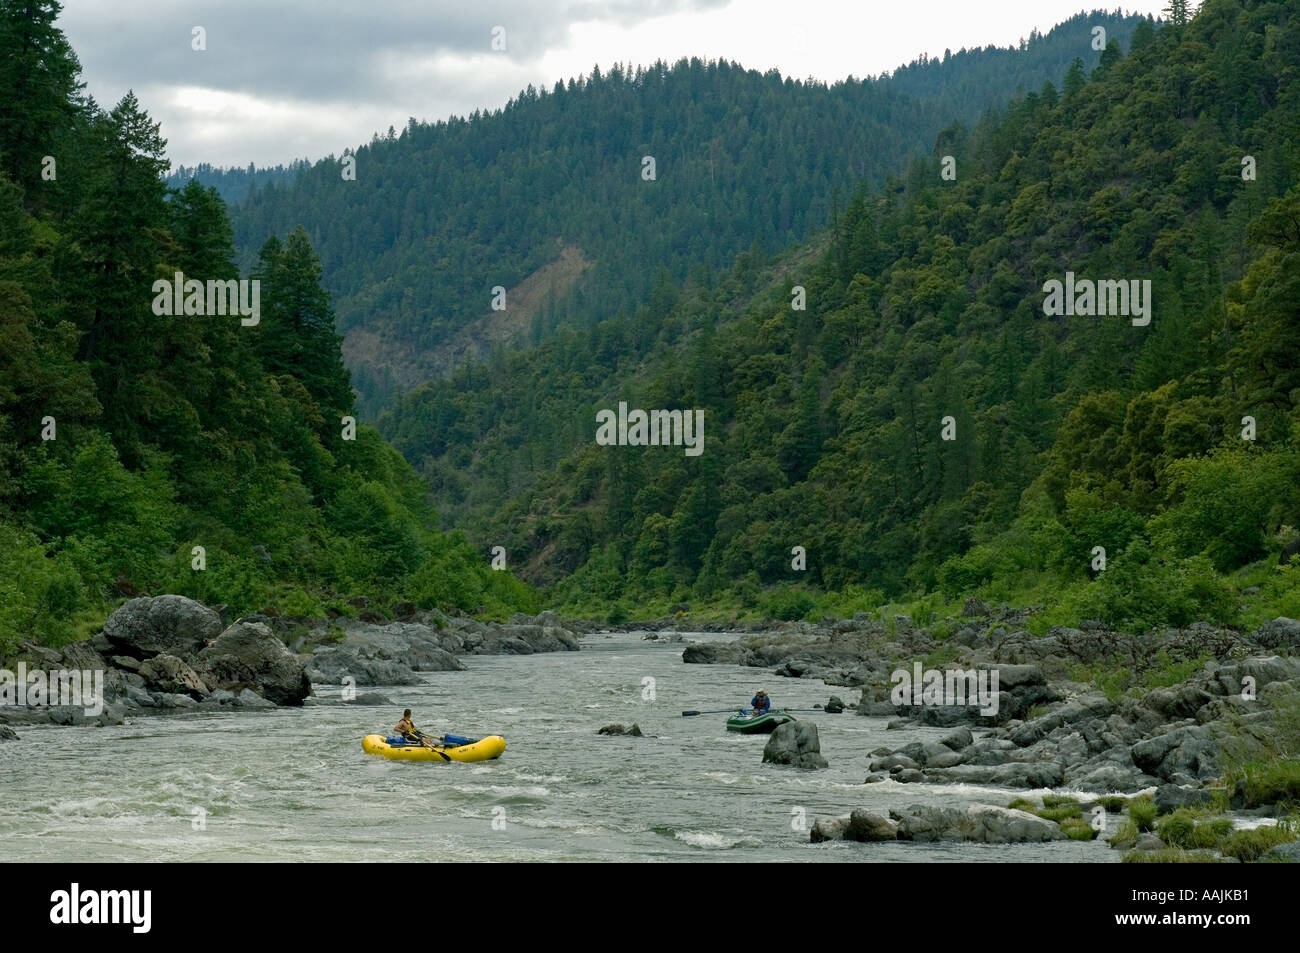 USA OREGON, Siskiyou Mountains, ROGUE Wild and Scenic RIVER, Boaters on river Stock Photo